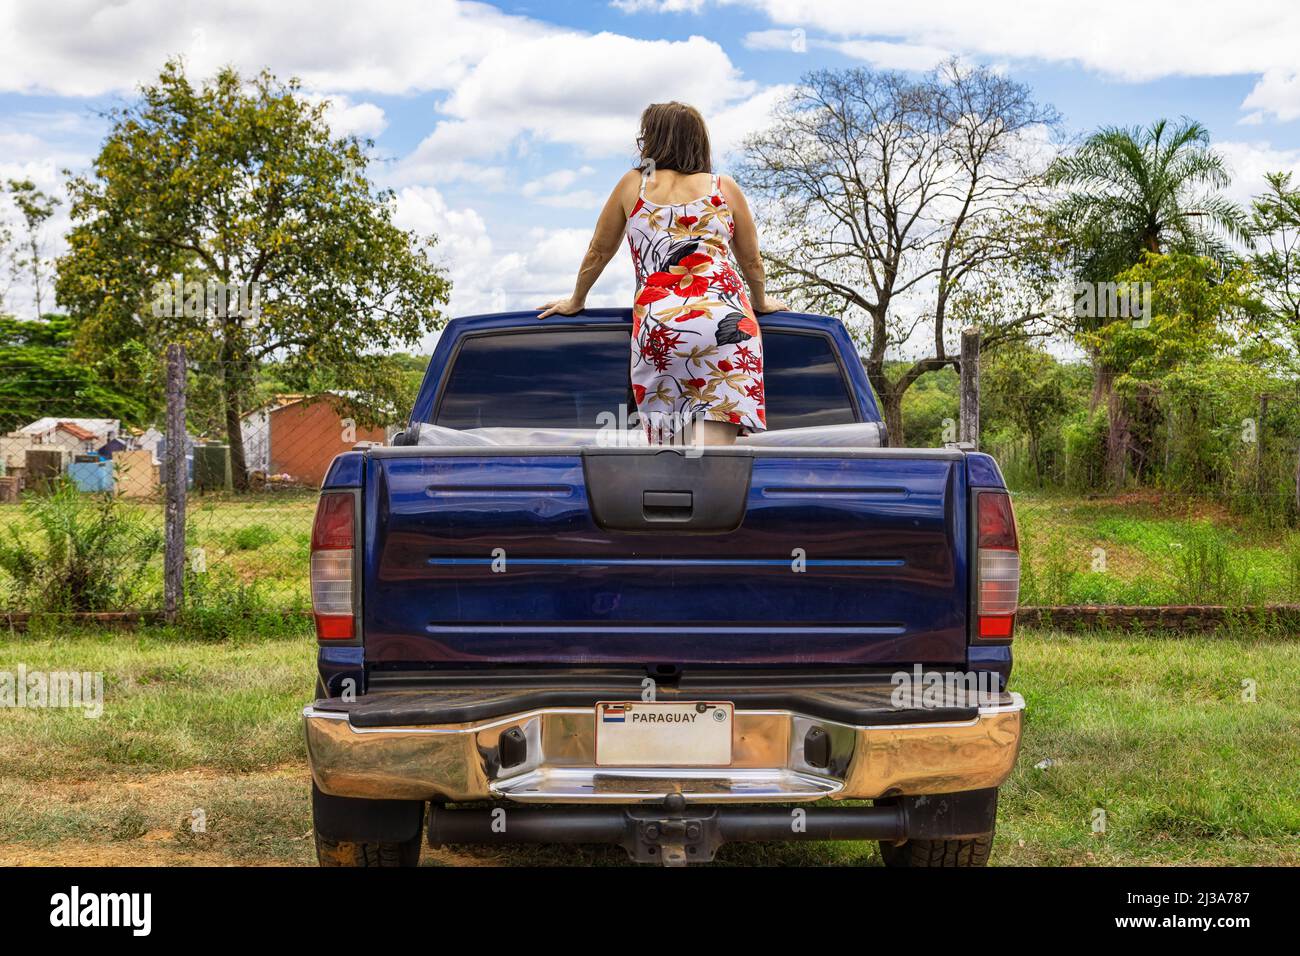 A woman stands on the back of a pick-up truck in Paraguay. Stock Photo